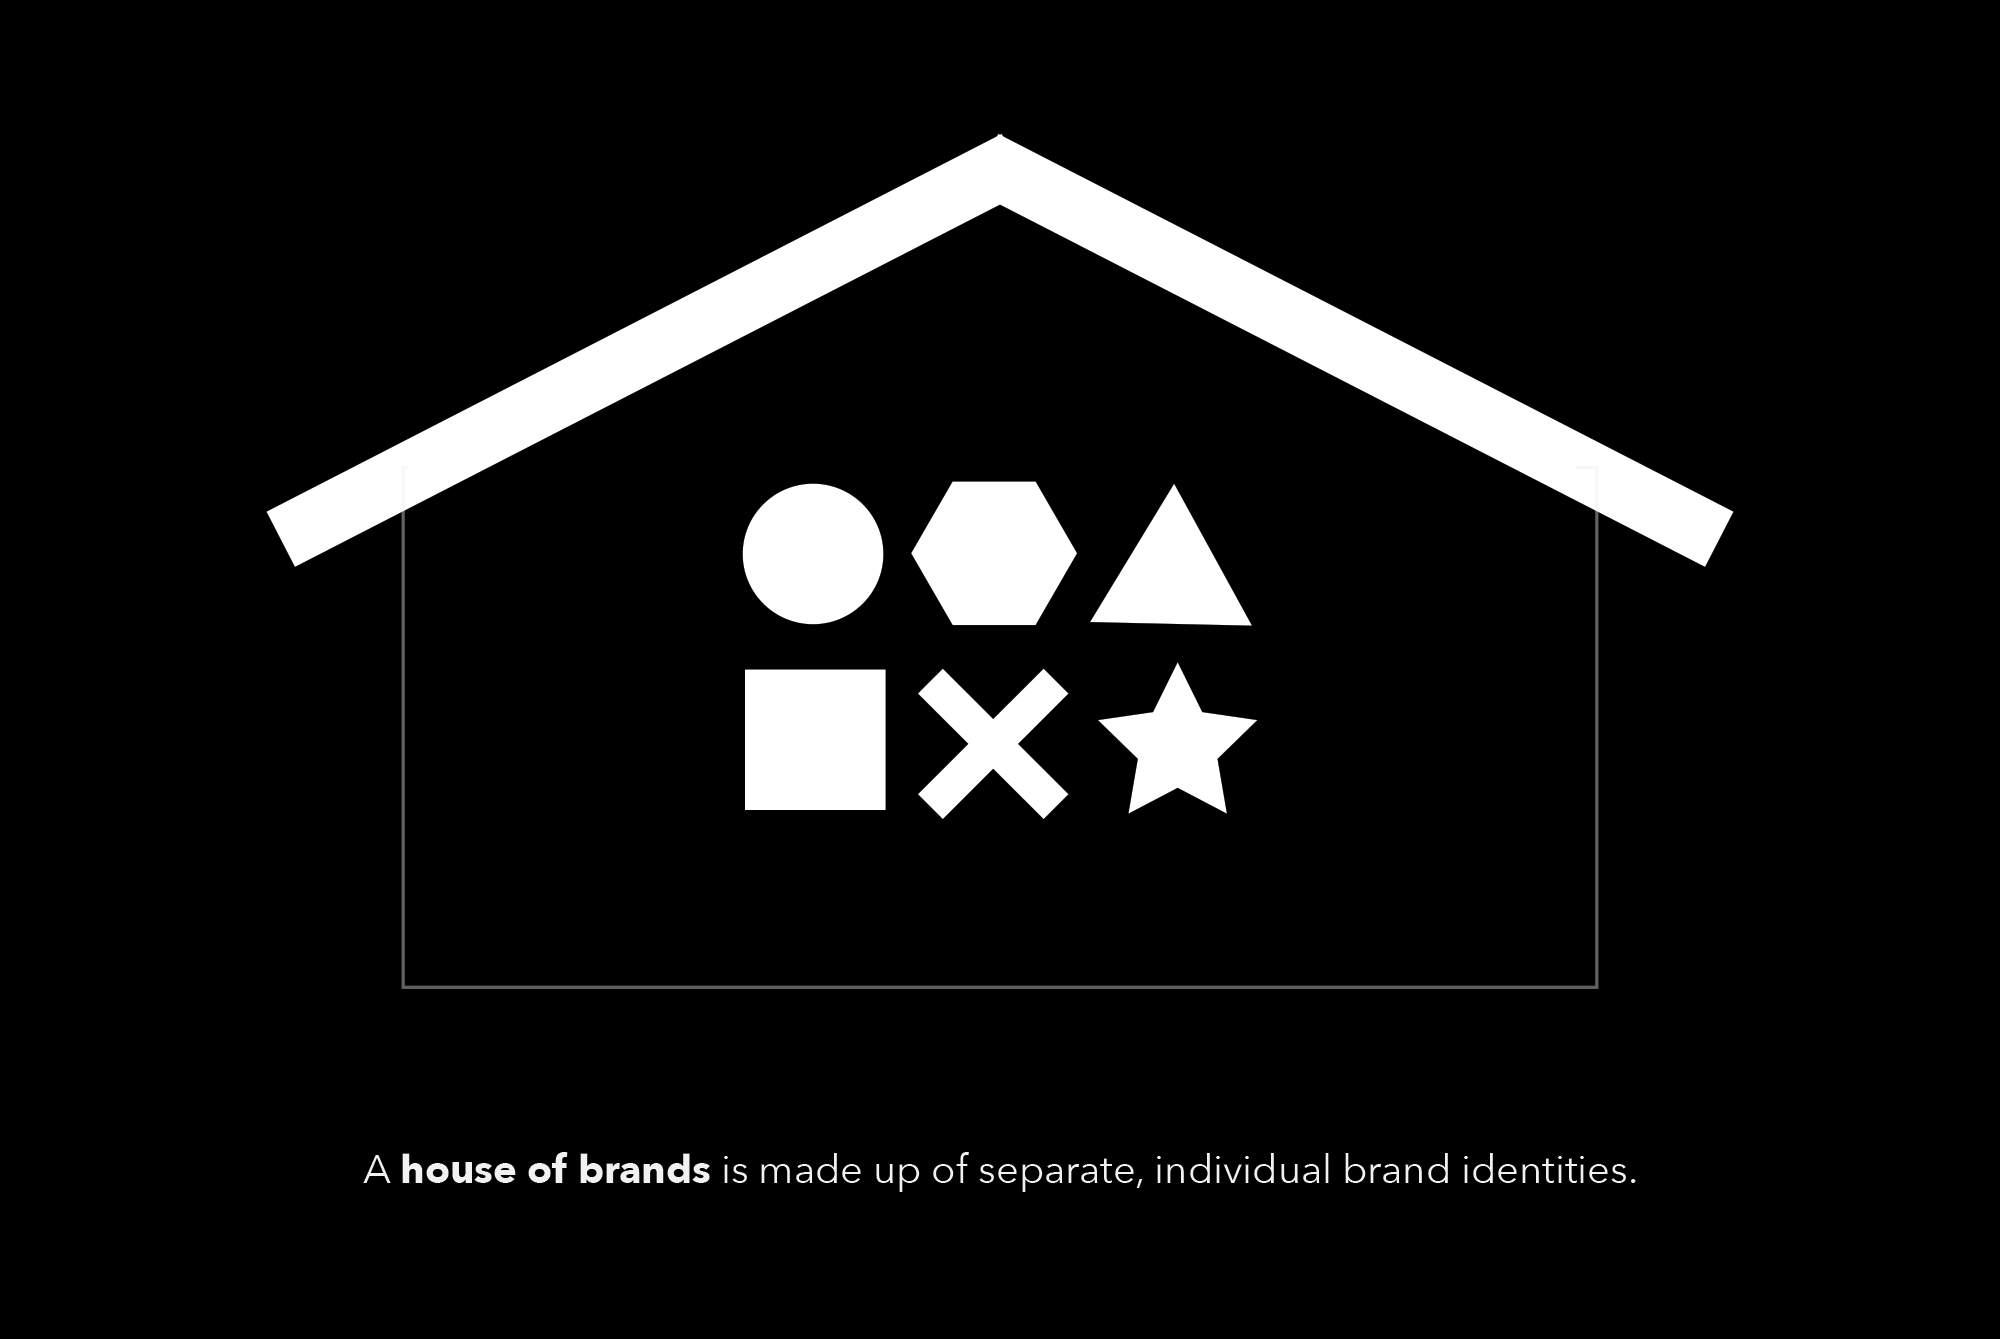 Example of Brand Architecture – The House of Brands